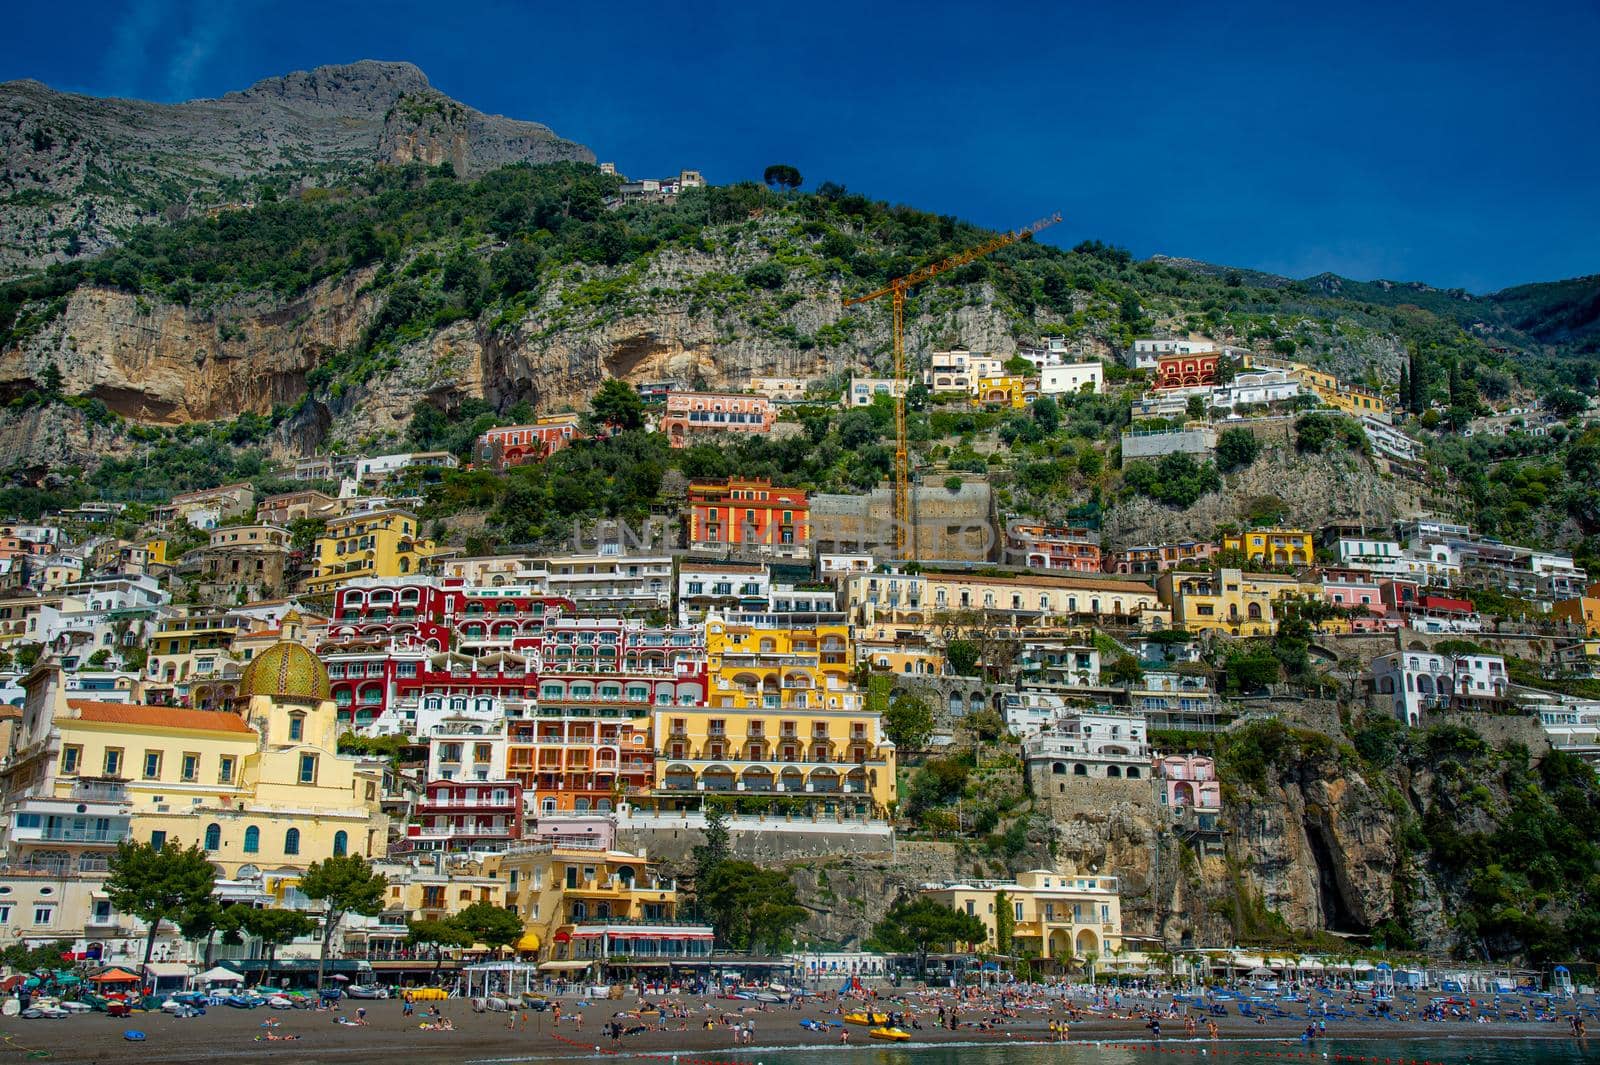 Amalfi Coast Italy photographed from the ferryboat on a sunny day with colourful houses visible on the coast 2022 april 15